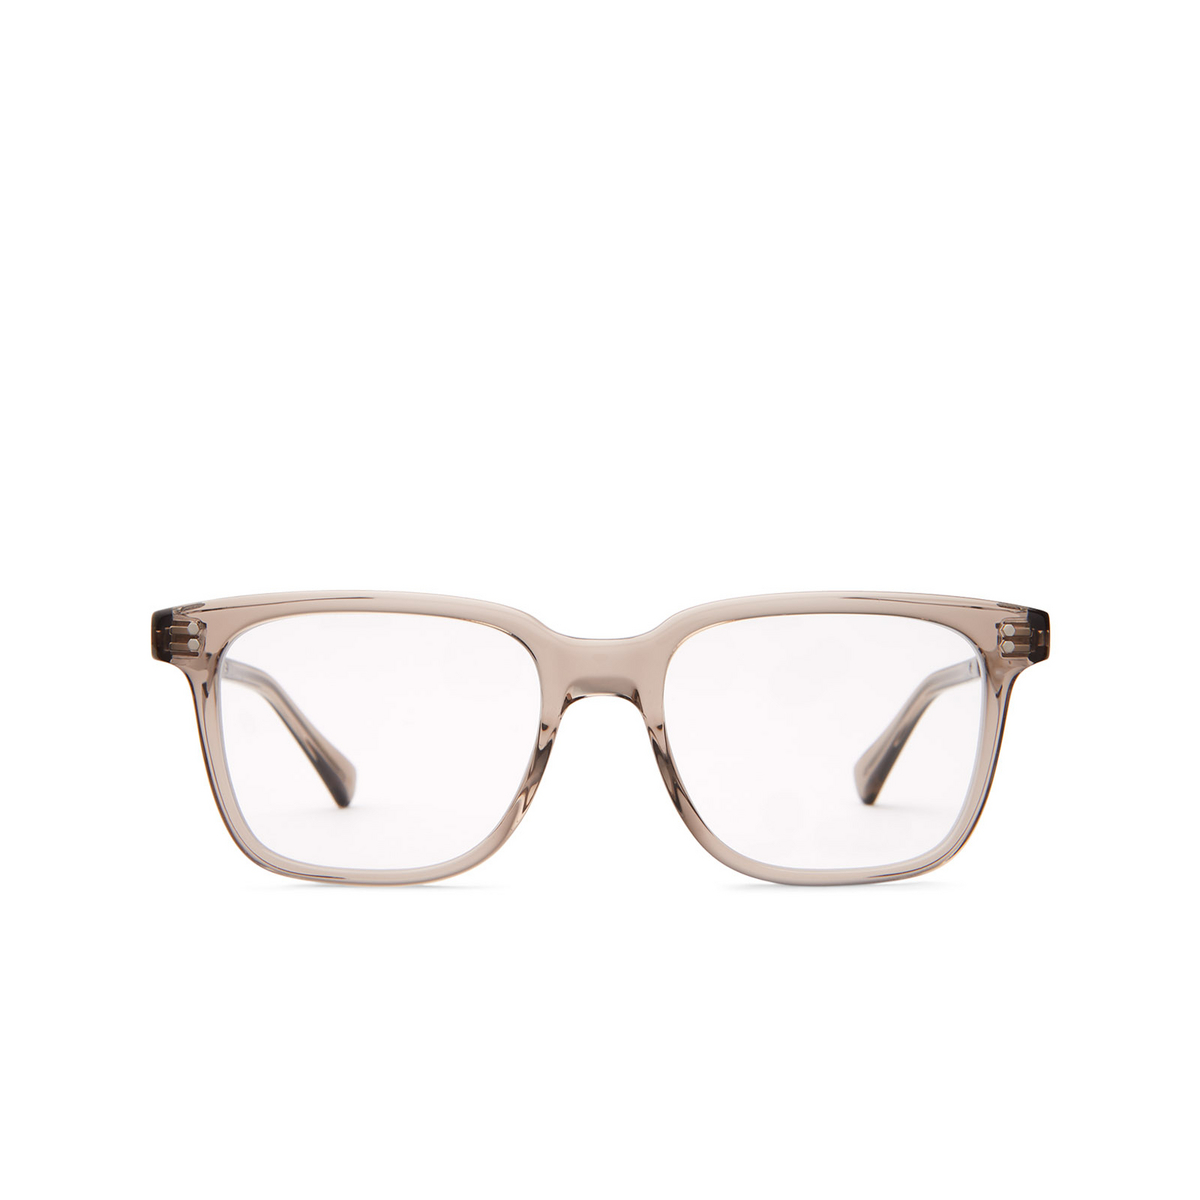 Mr. Leight LAUTNER C Eyeglasses GRYCRY-PW Grey Crystal-Pewter - front view